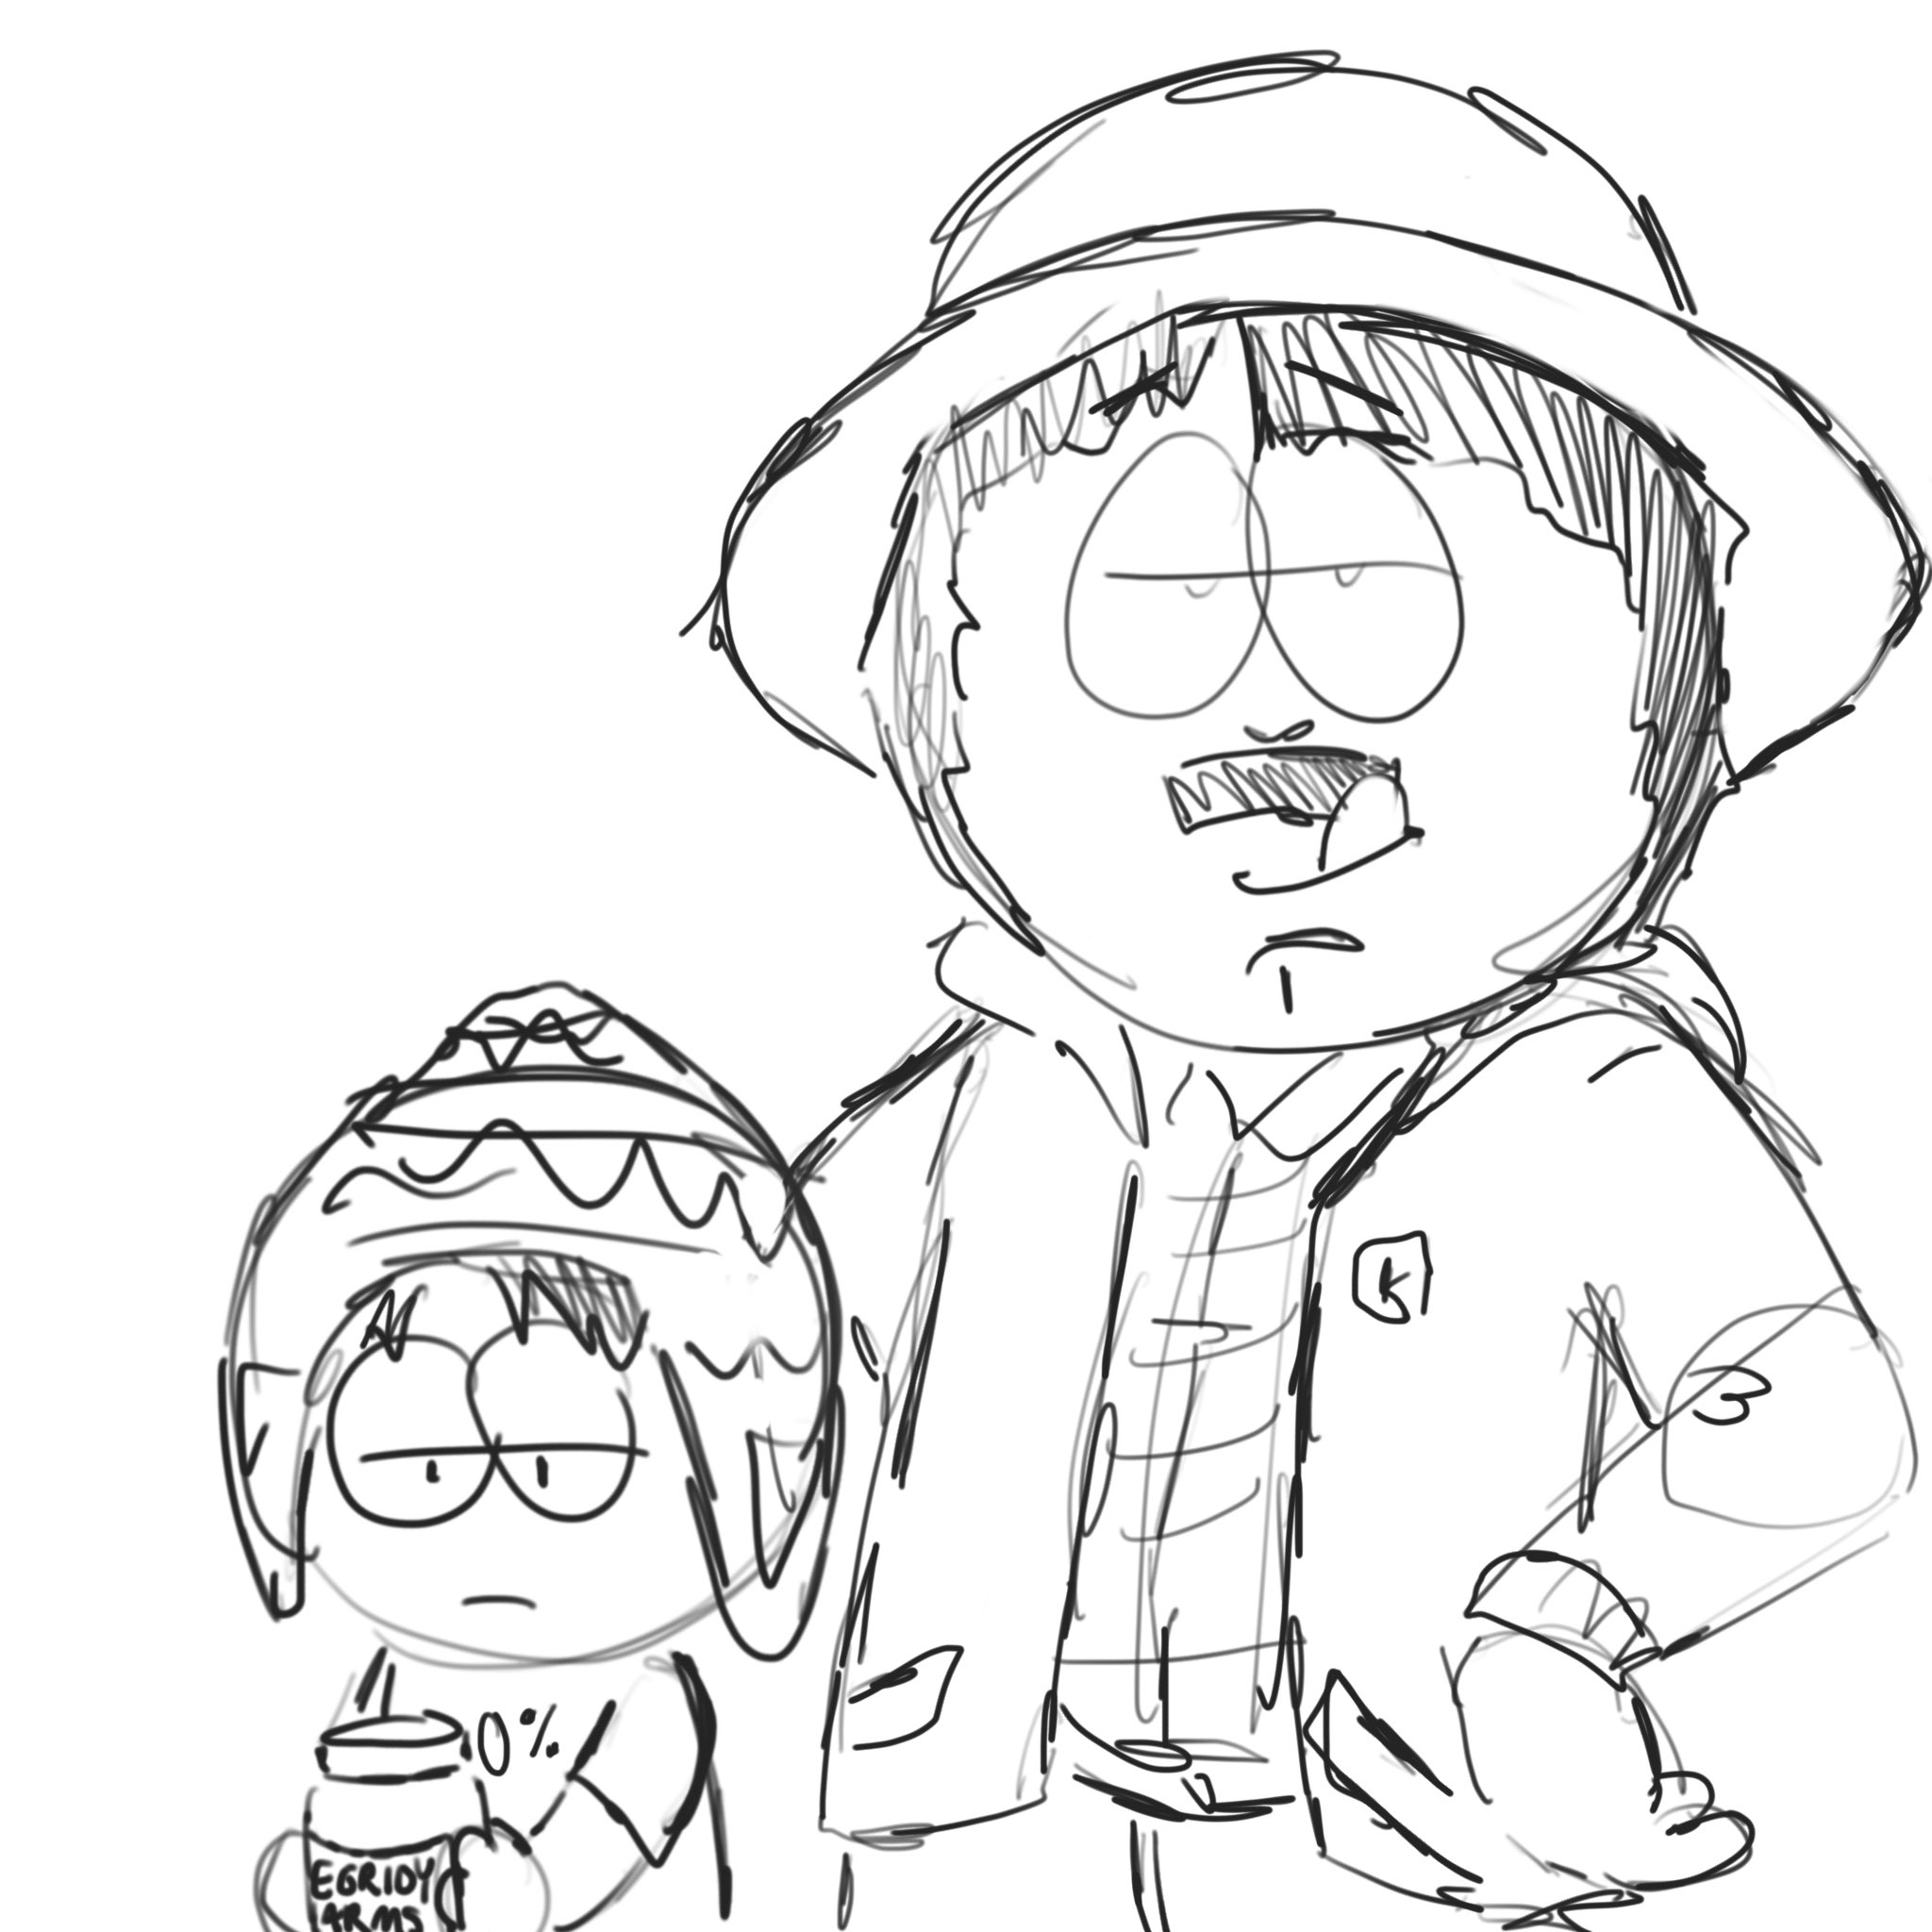 Ðspllmissions openedð on x rt tegridylean yes i draw other characters besides randy look stans right there southpark httpstcobzuhdbcz x